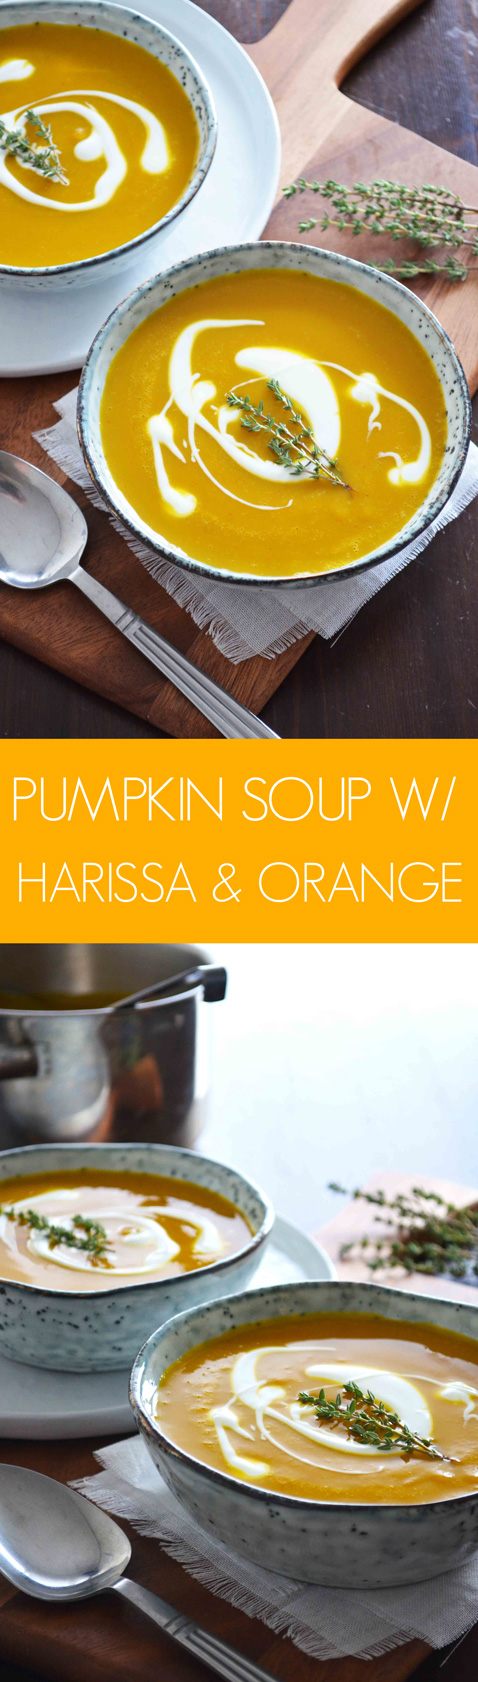 A recipe for Pumpkin Soup with Harissa and Orange. This soup is great to enjoy as lunch or as a light post-holiday dinner. The spicy Harissa paste and the orange juice and zest give the soup a North-African/Middle Eastern vibe. Recipe by That Healthy Kitchen